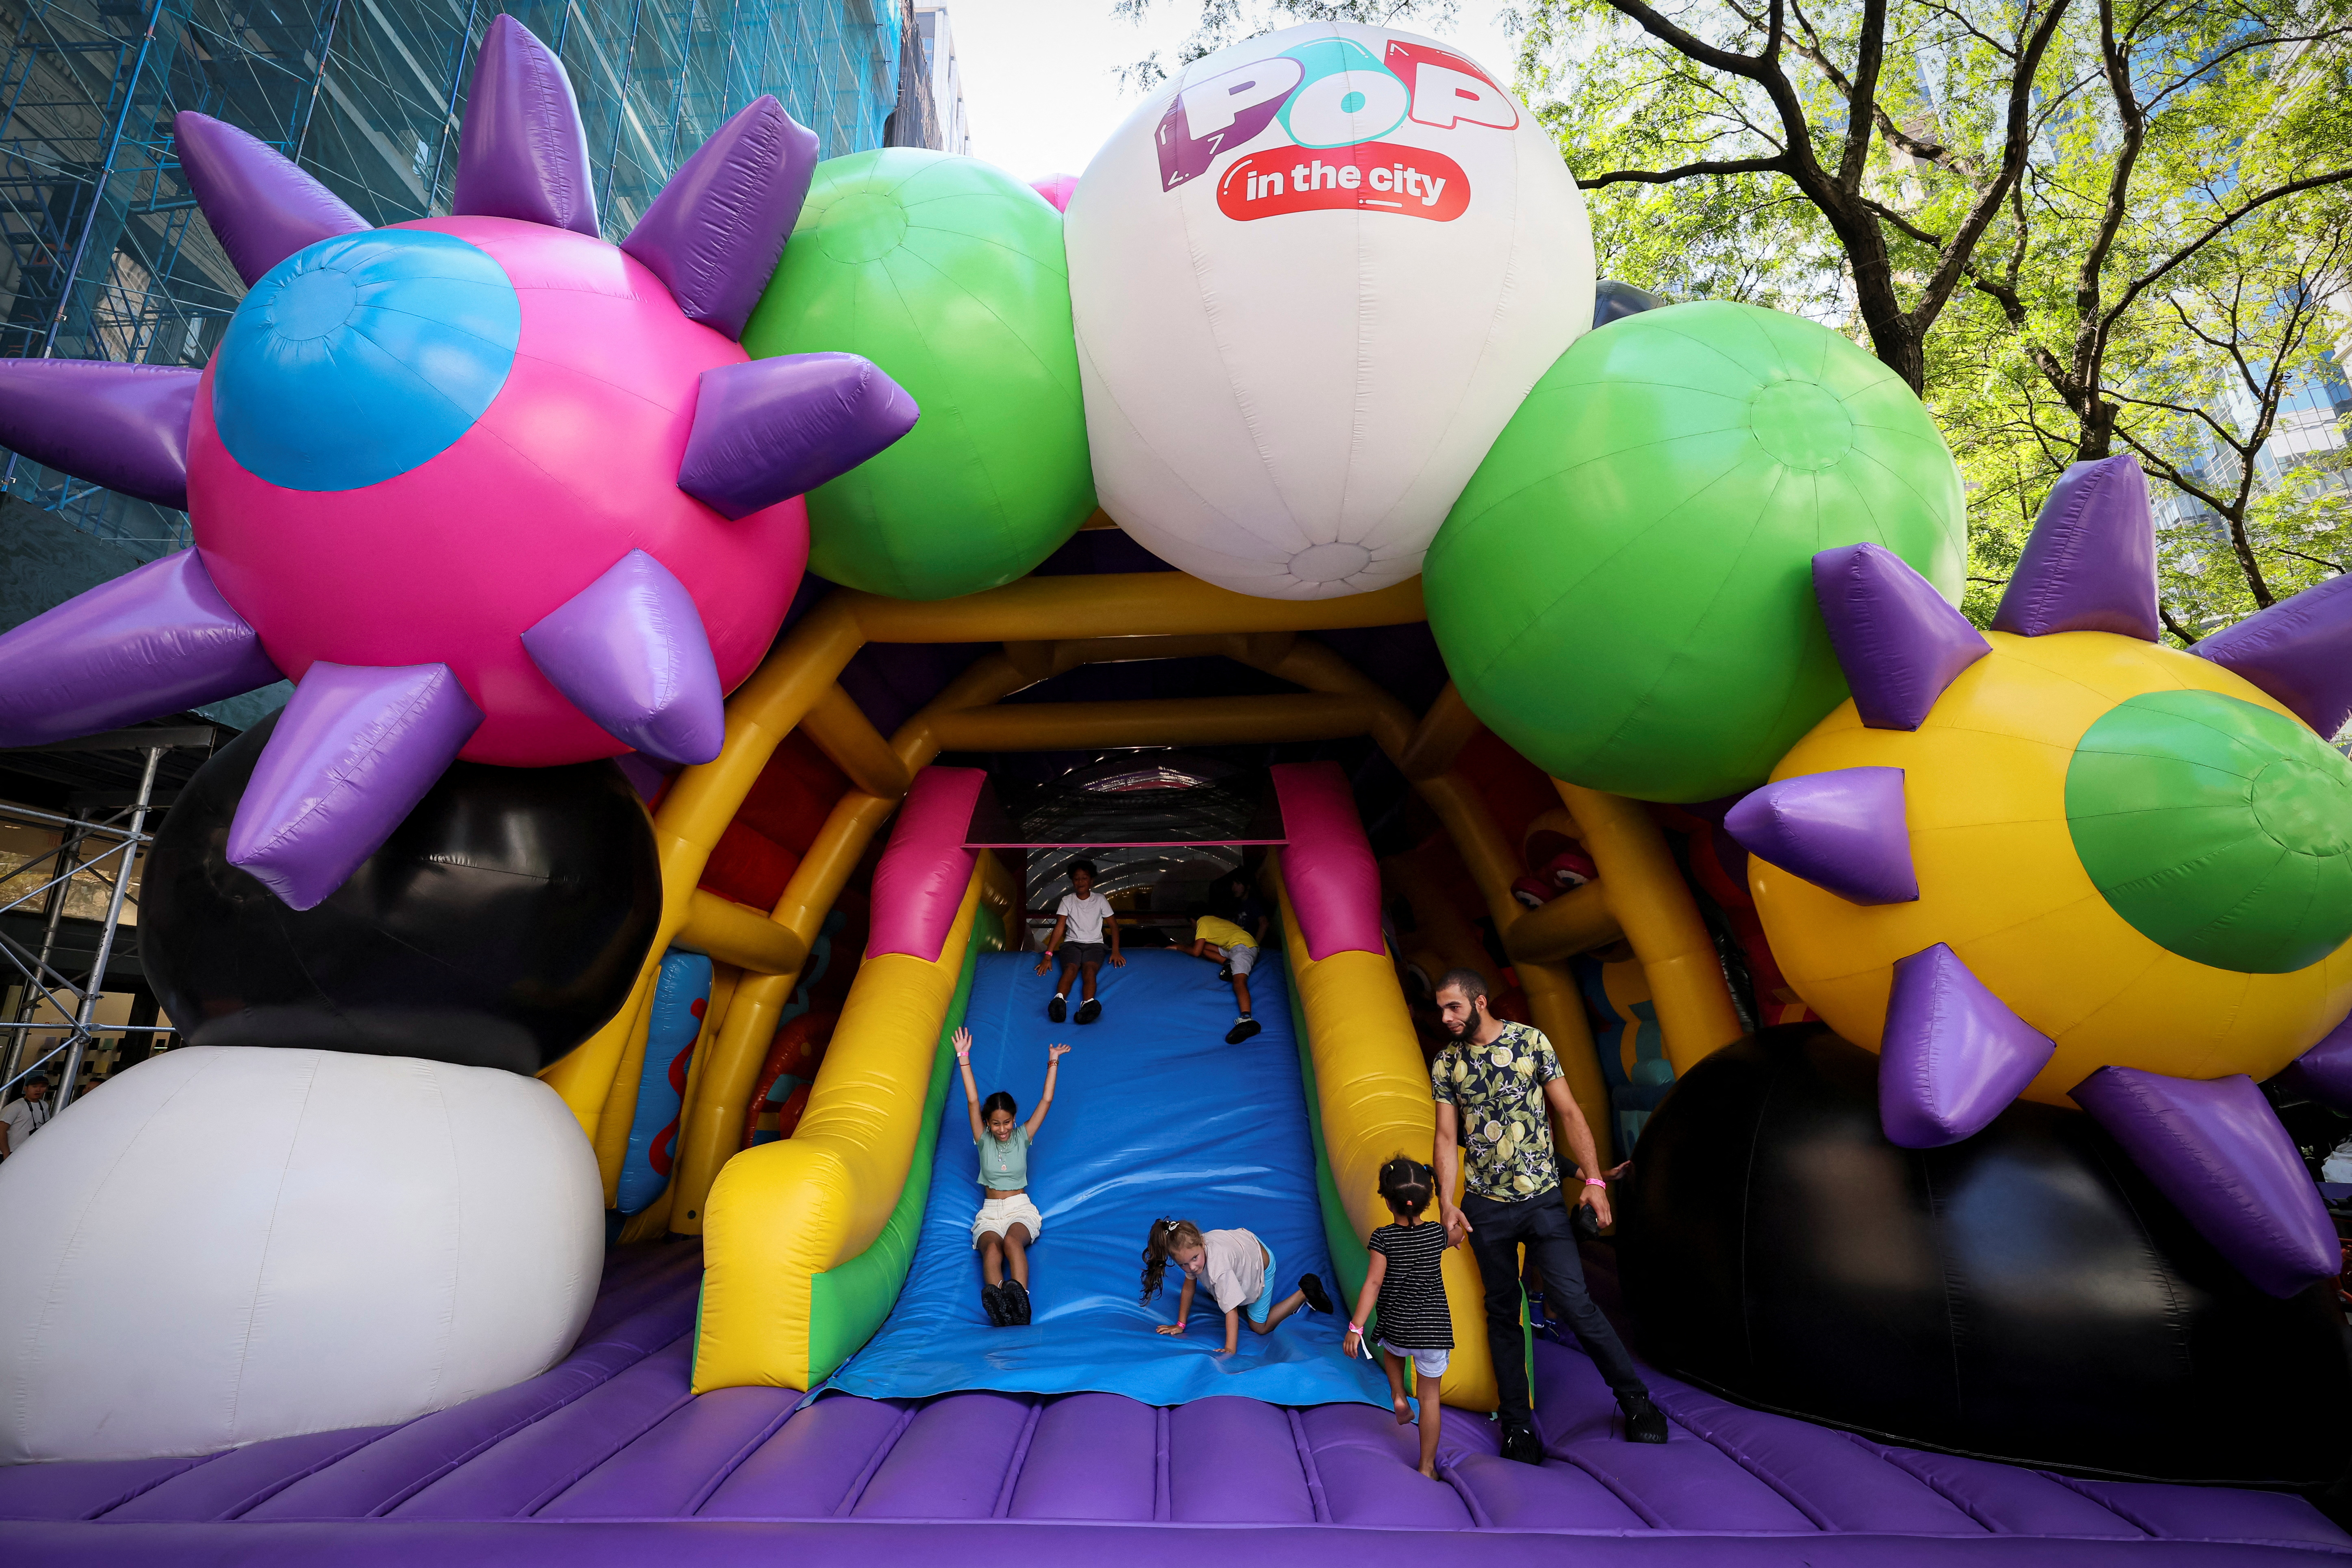 Children enjoy Pop in the City, a 120-foot-long inflatable walk-through experience in New York